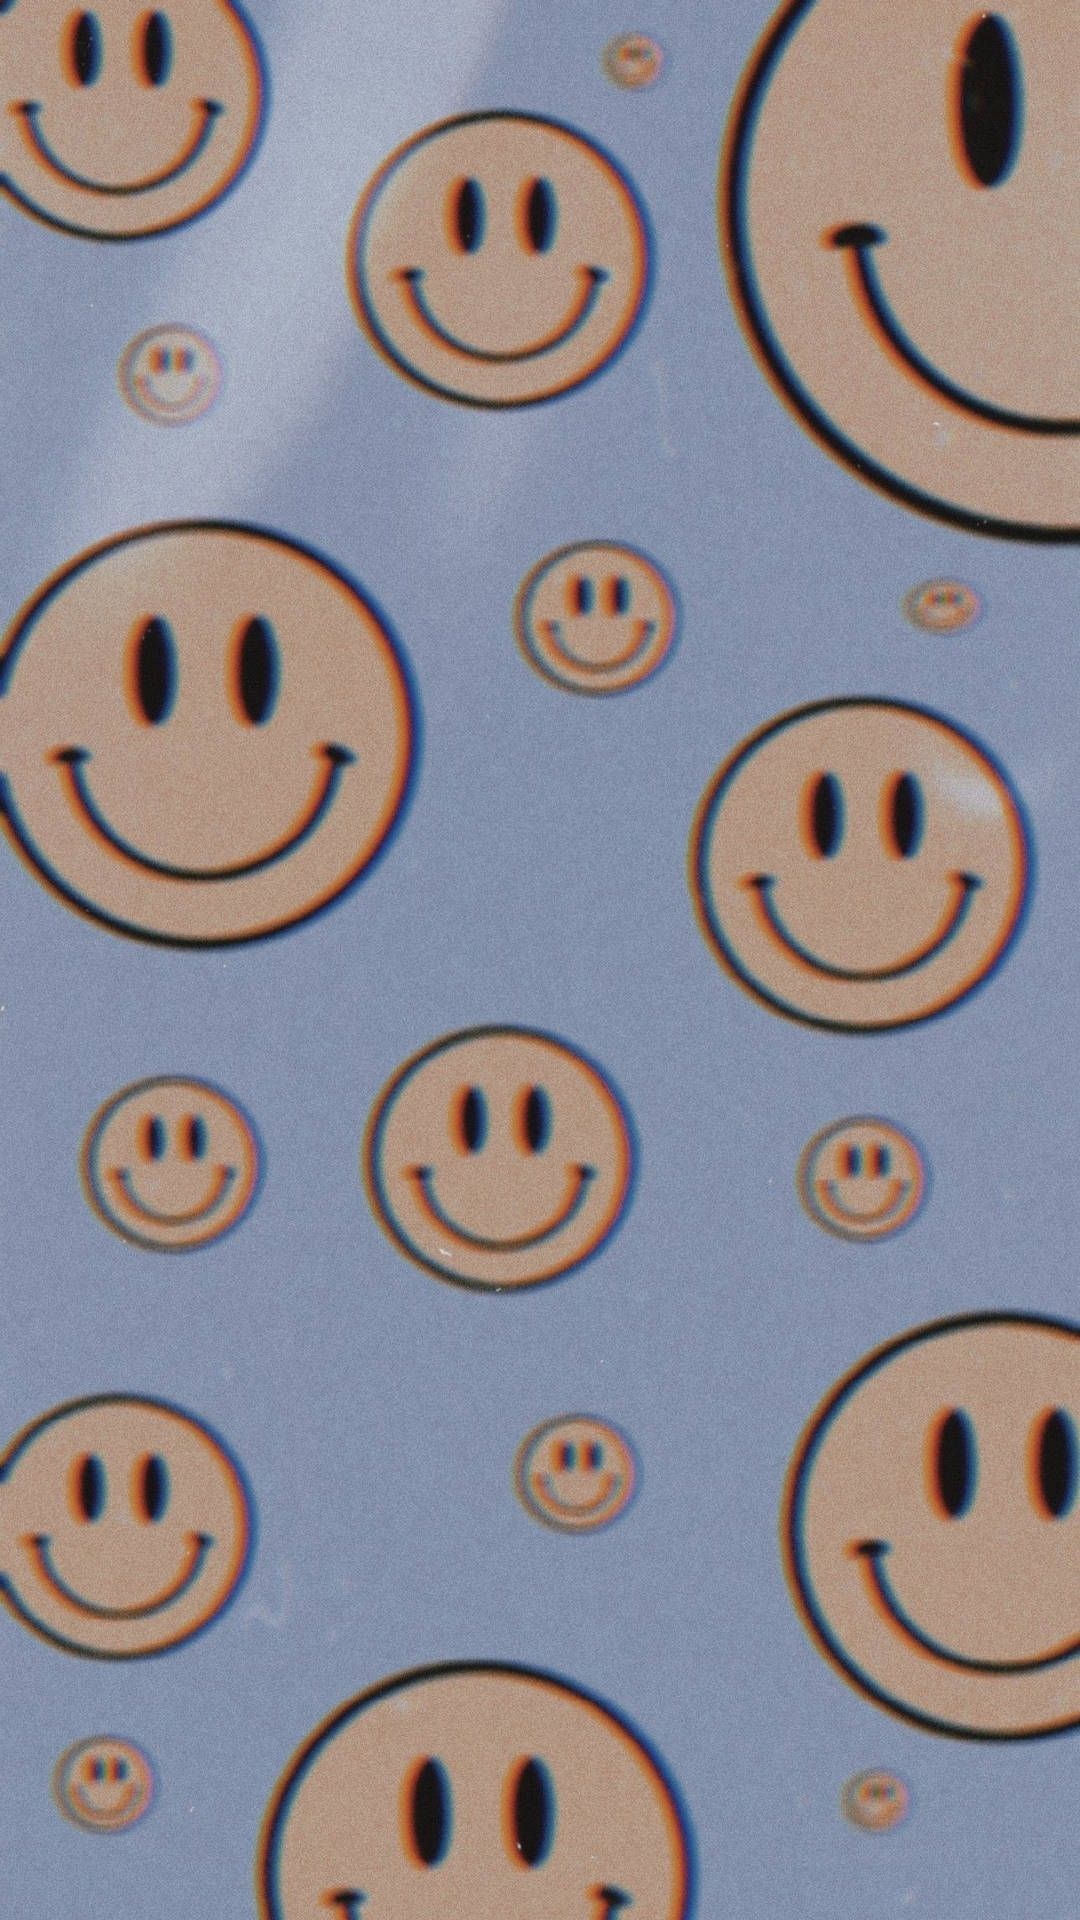 Download Aesthetic Profile Picture Of Smiley Wallpaper